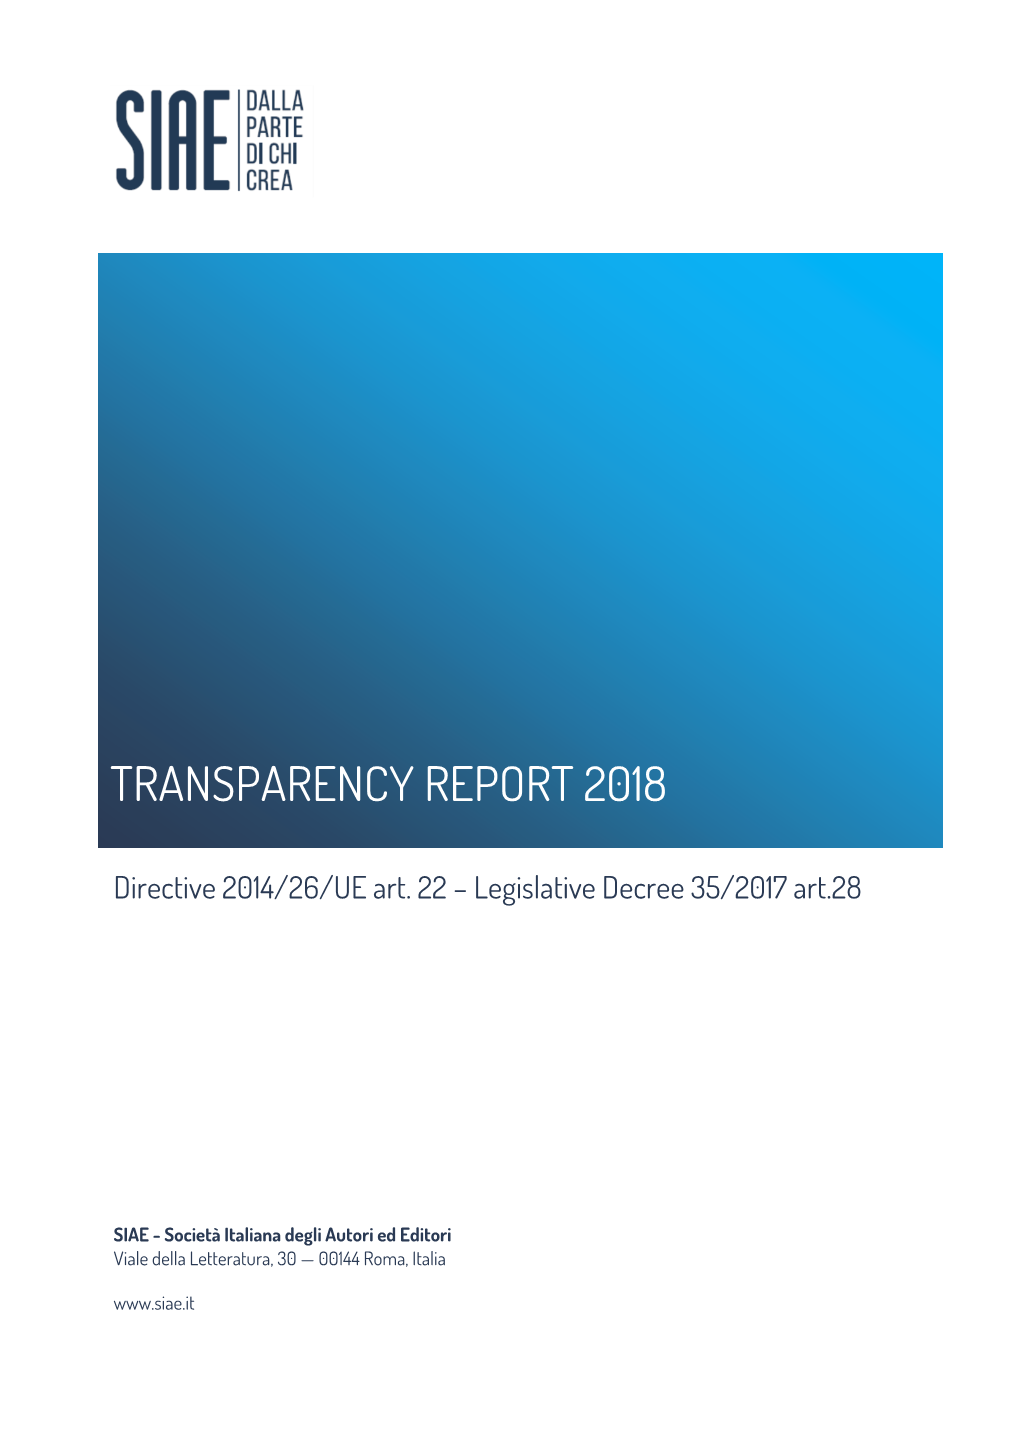 Transparency Report 2018